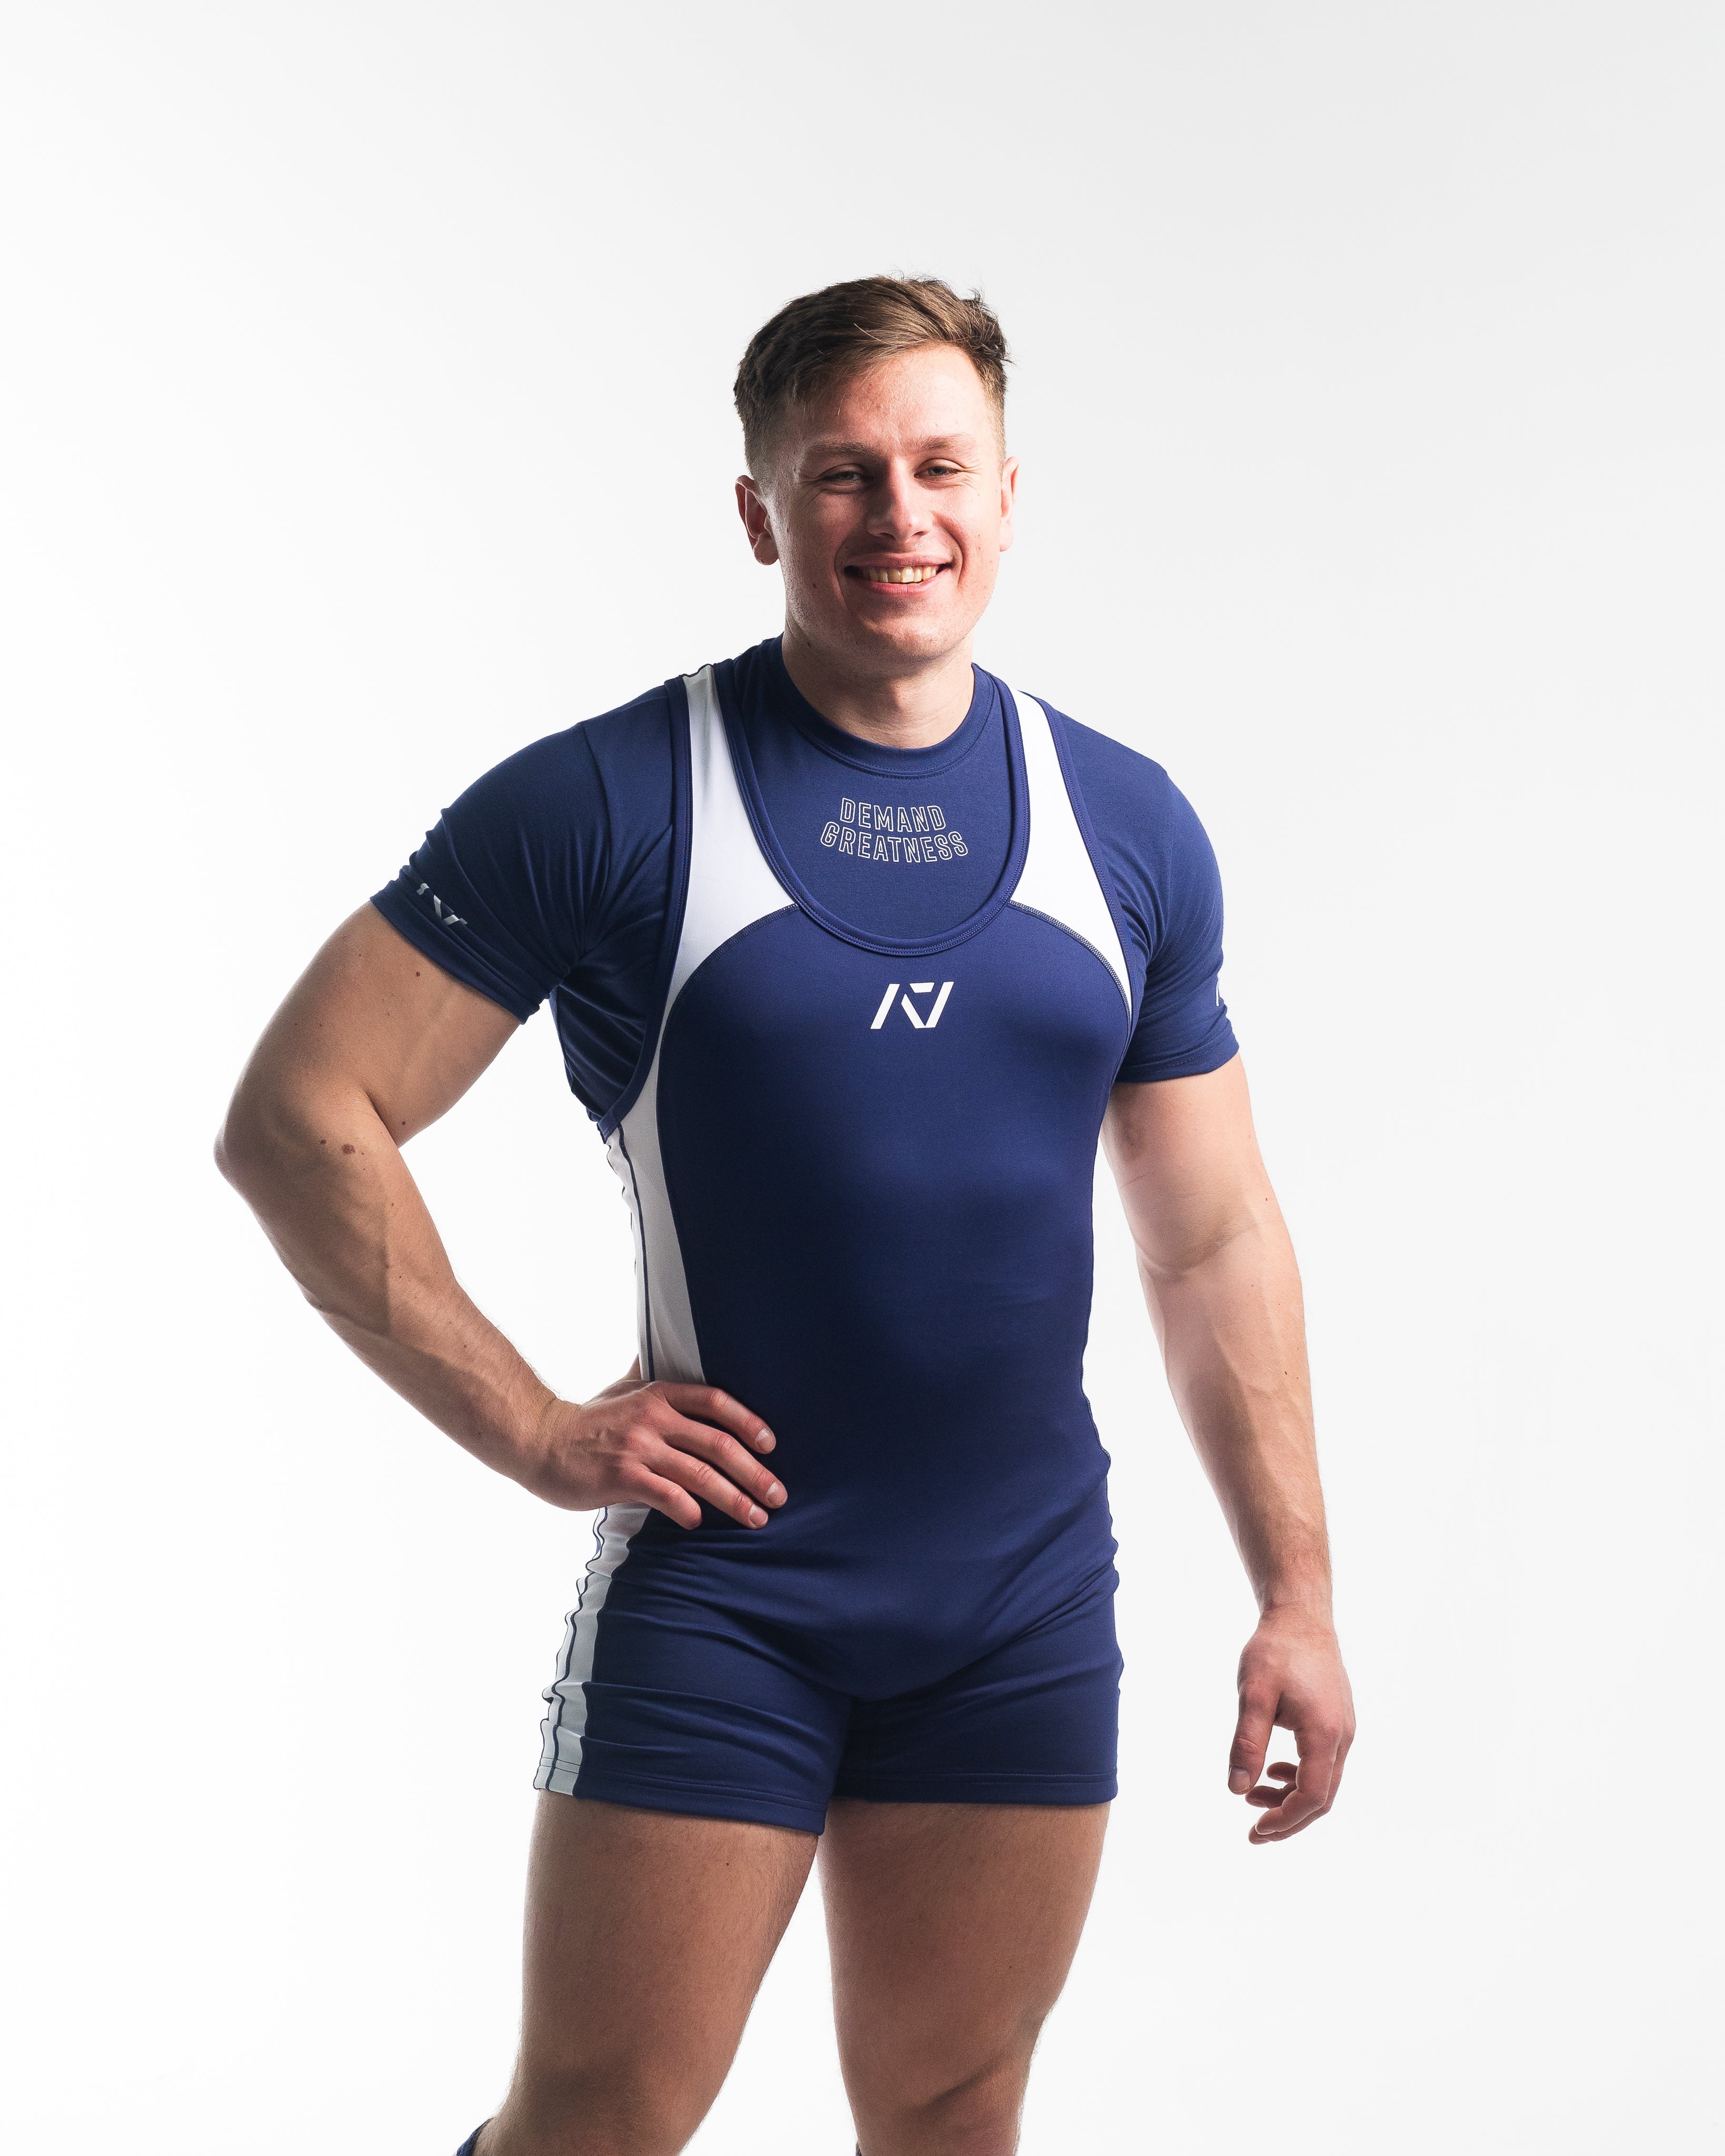 A7 IPF Approved NightLight Luno singlet with extra lat mobility, side panel stitching to guide the squat depth level and curved panel design for a slimming look. The Women's cut singlet features a tapered waist and additional quad room. The IPF Approved Kit includes Powerlifting Singlet, A7 Meet Shirt, A7 Zebra Wrist Wraps, A7 Deadlift Socks, Hourglass Knee Sleeves (Stiff Knee Sleeves and Rigor Mortis Knee Sleeves). Genouillères powerlifting shipping to France, Spain, Ireland, Germany, Italy, Sweden and EU.